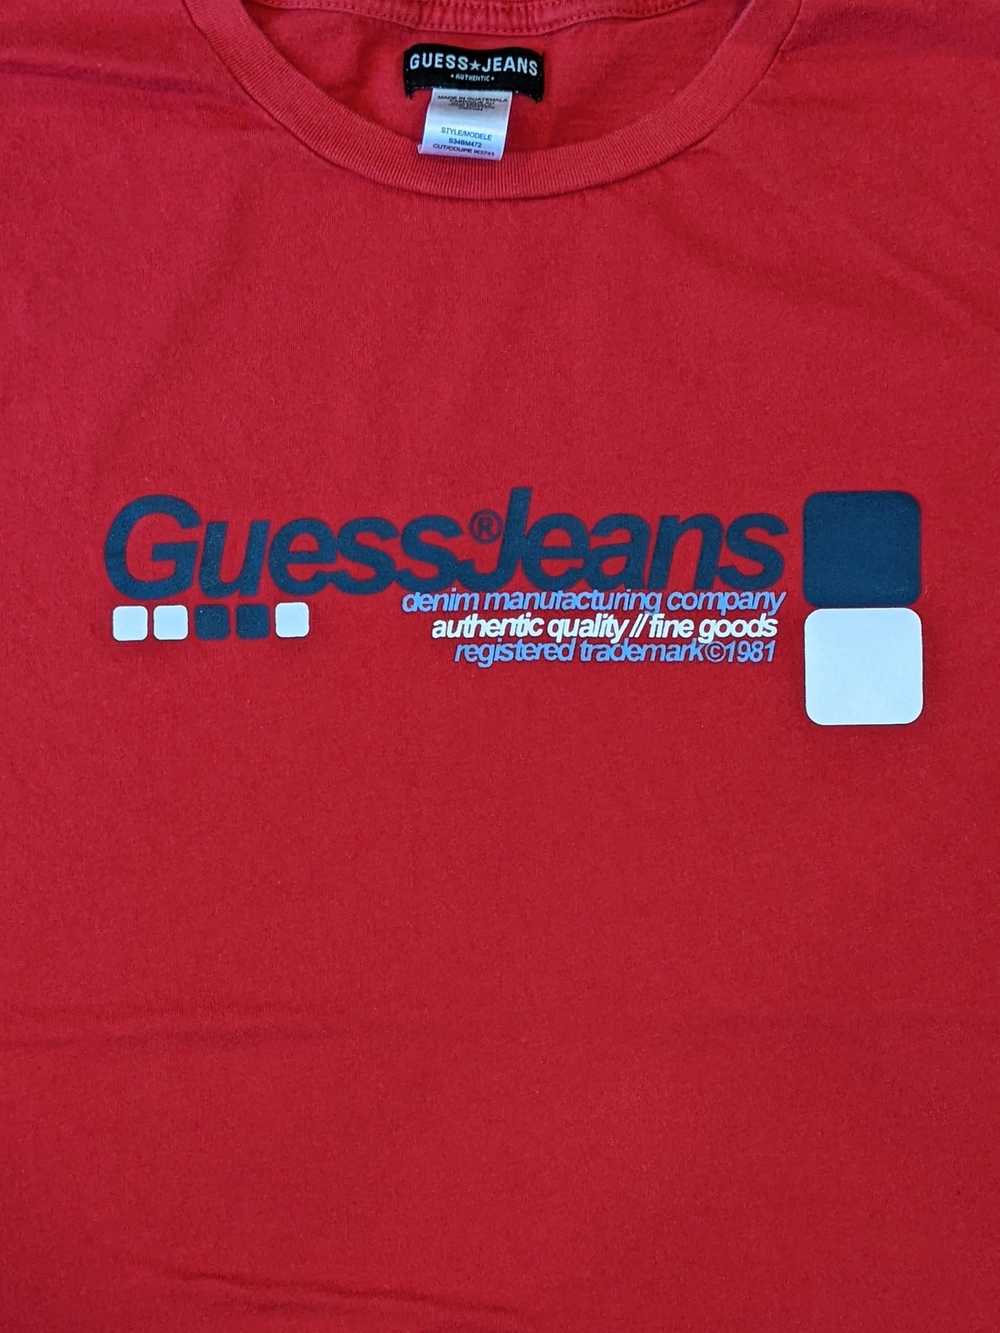 Guess Guess Jeans Co. red t-shirt - image 2